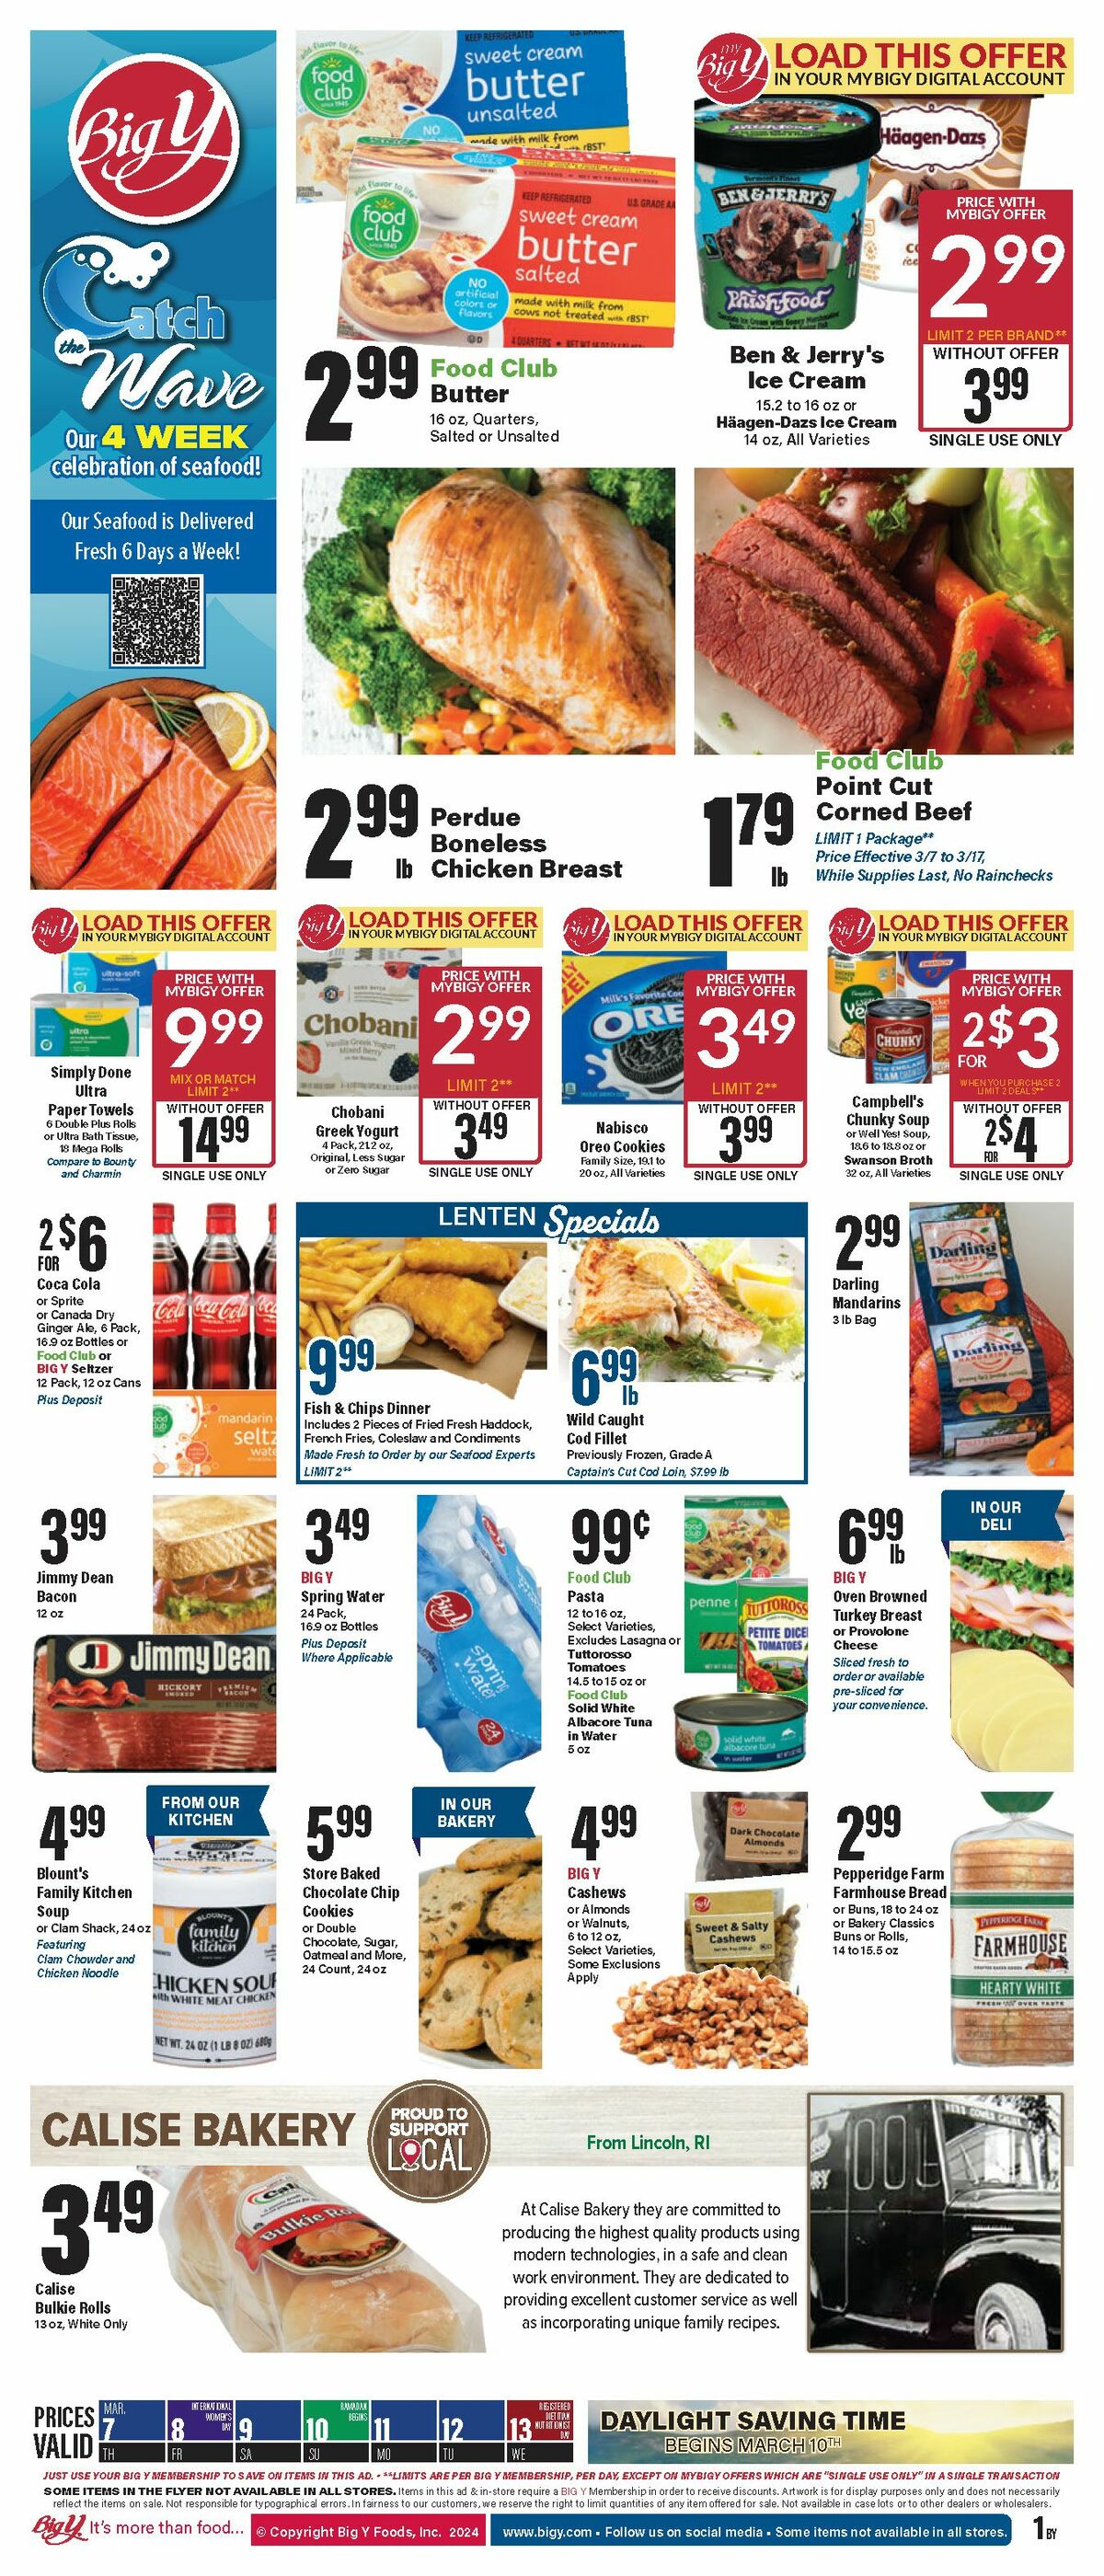 Big Y Weekly Ad from March 7